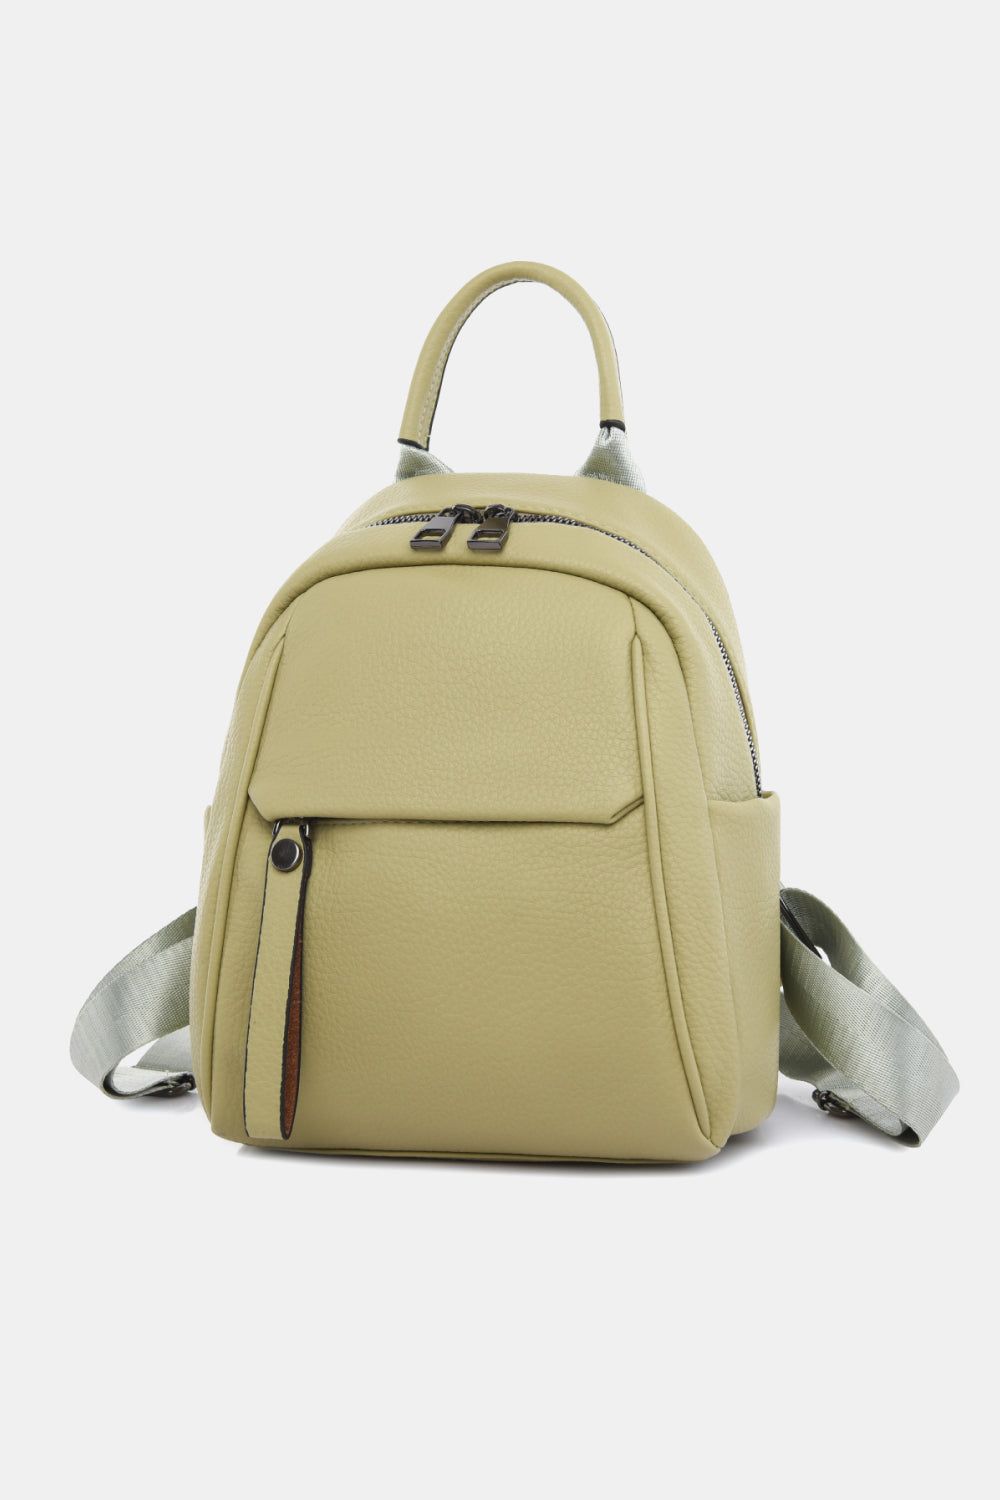 Small PU Leather Backpack.